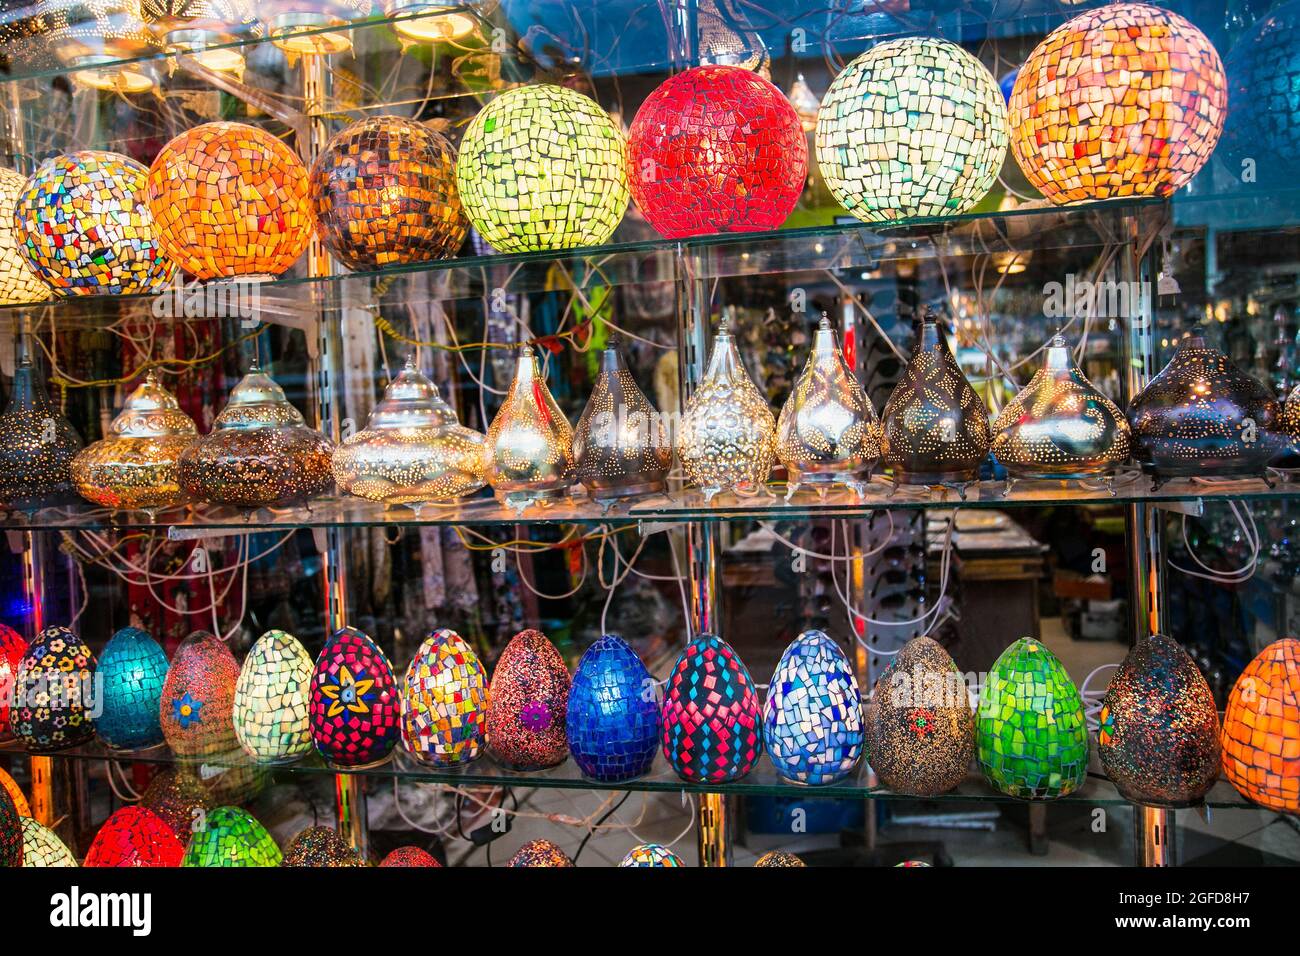 Street shop with colorful chandeliers lights in Hurghada, Egypt Stock Photo  - Alamy